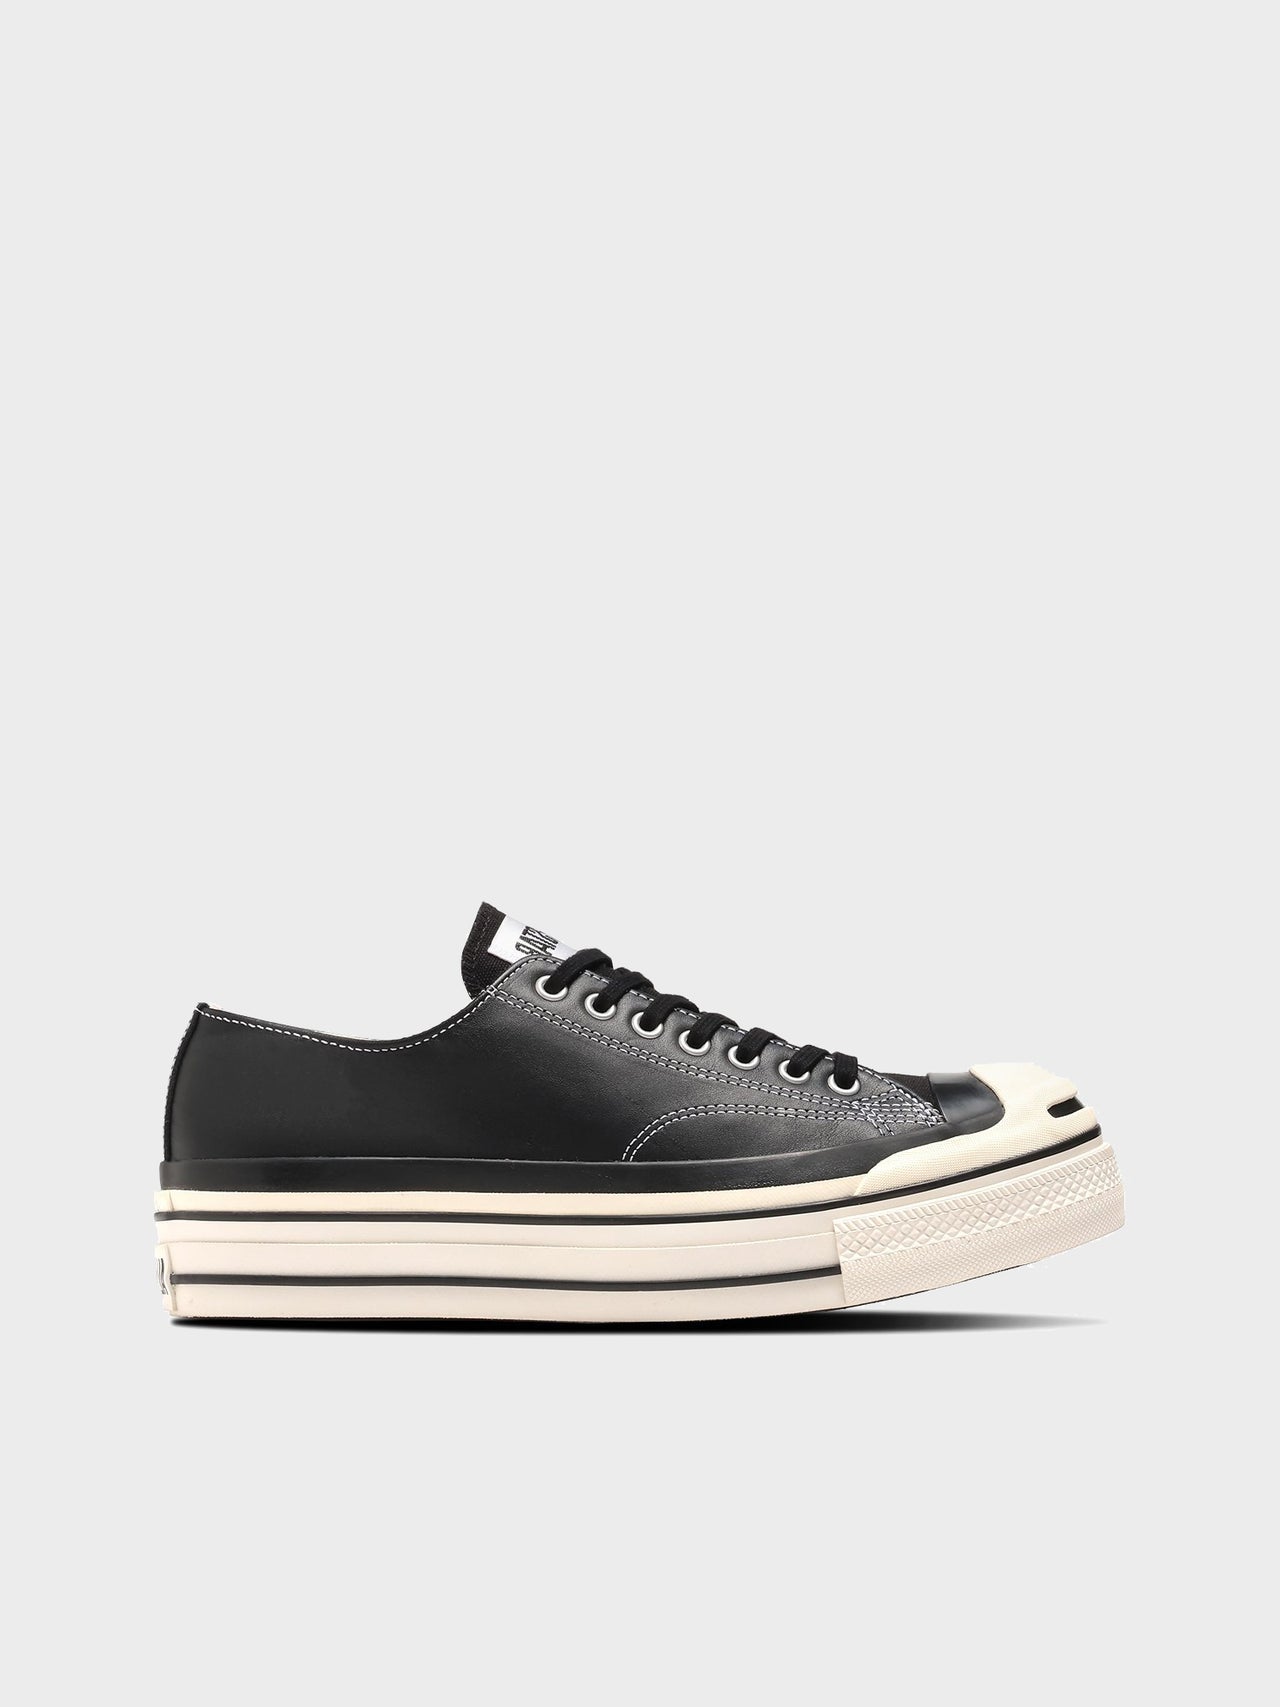 doublet x CONVERSE / ALL STAR × JACK PARCELL HYBRID SNEAKER (BLACK)